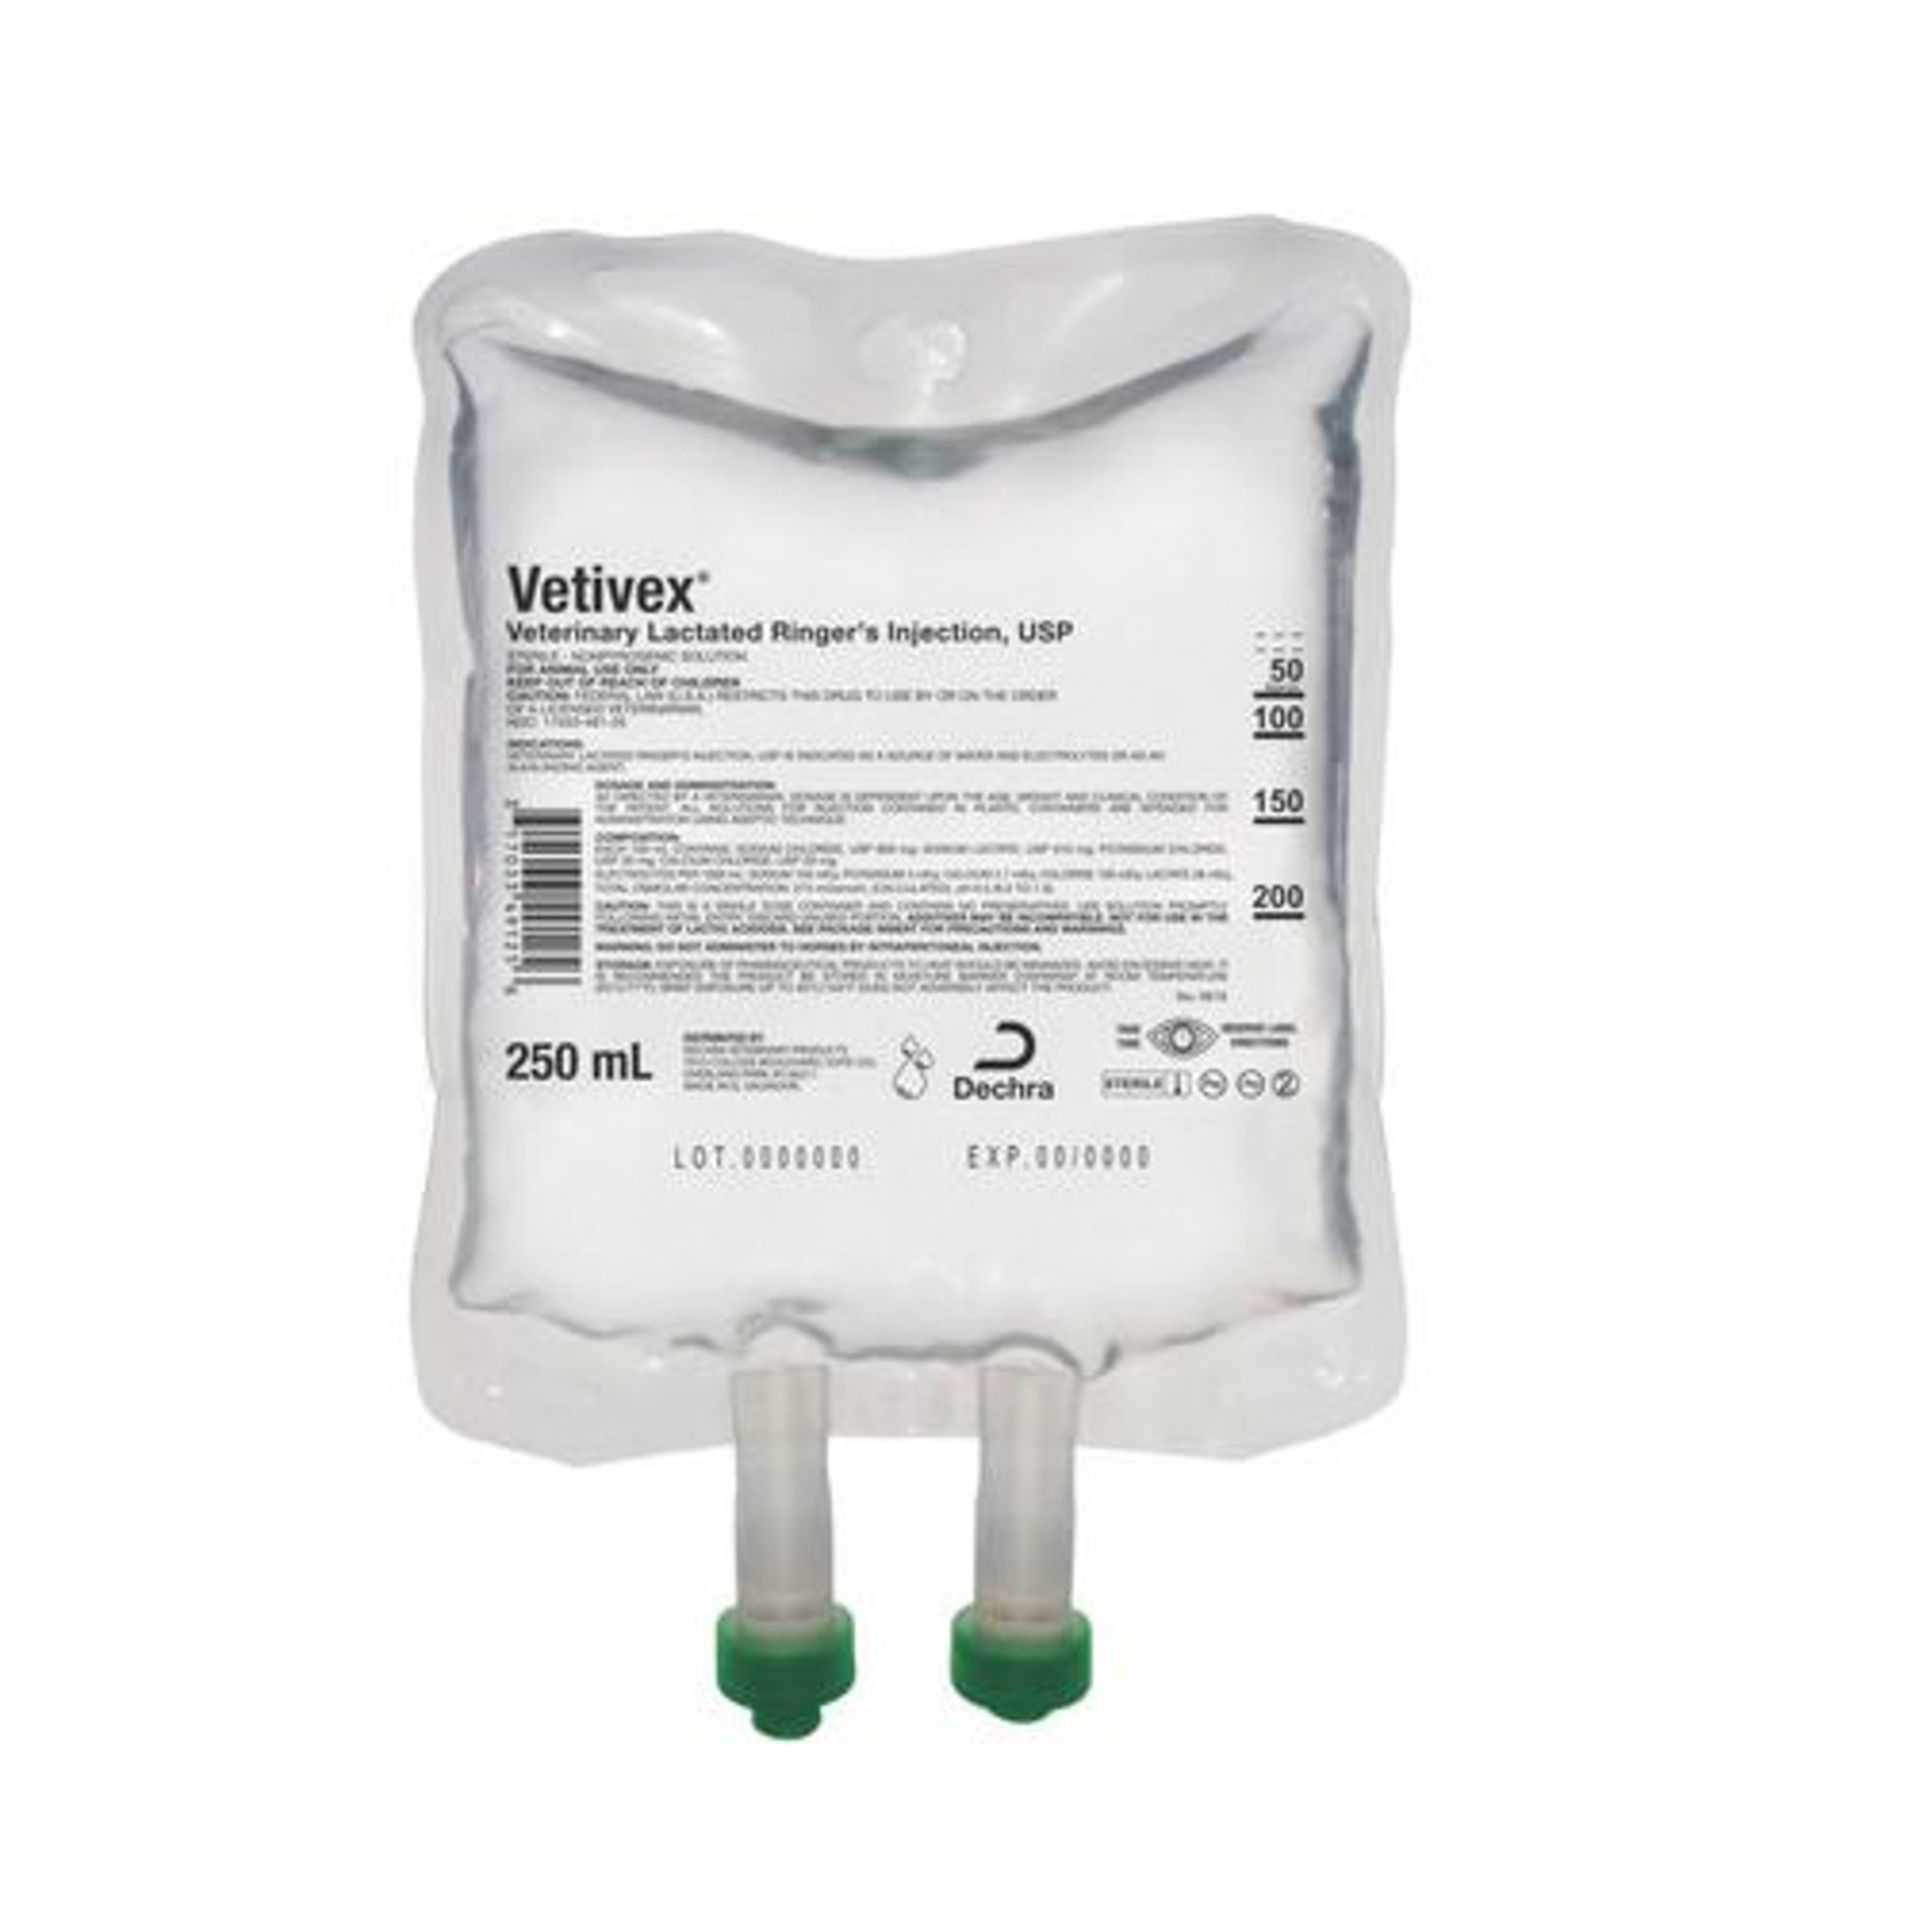 Vetivex Lactated Ringer’s Injection Usage